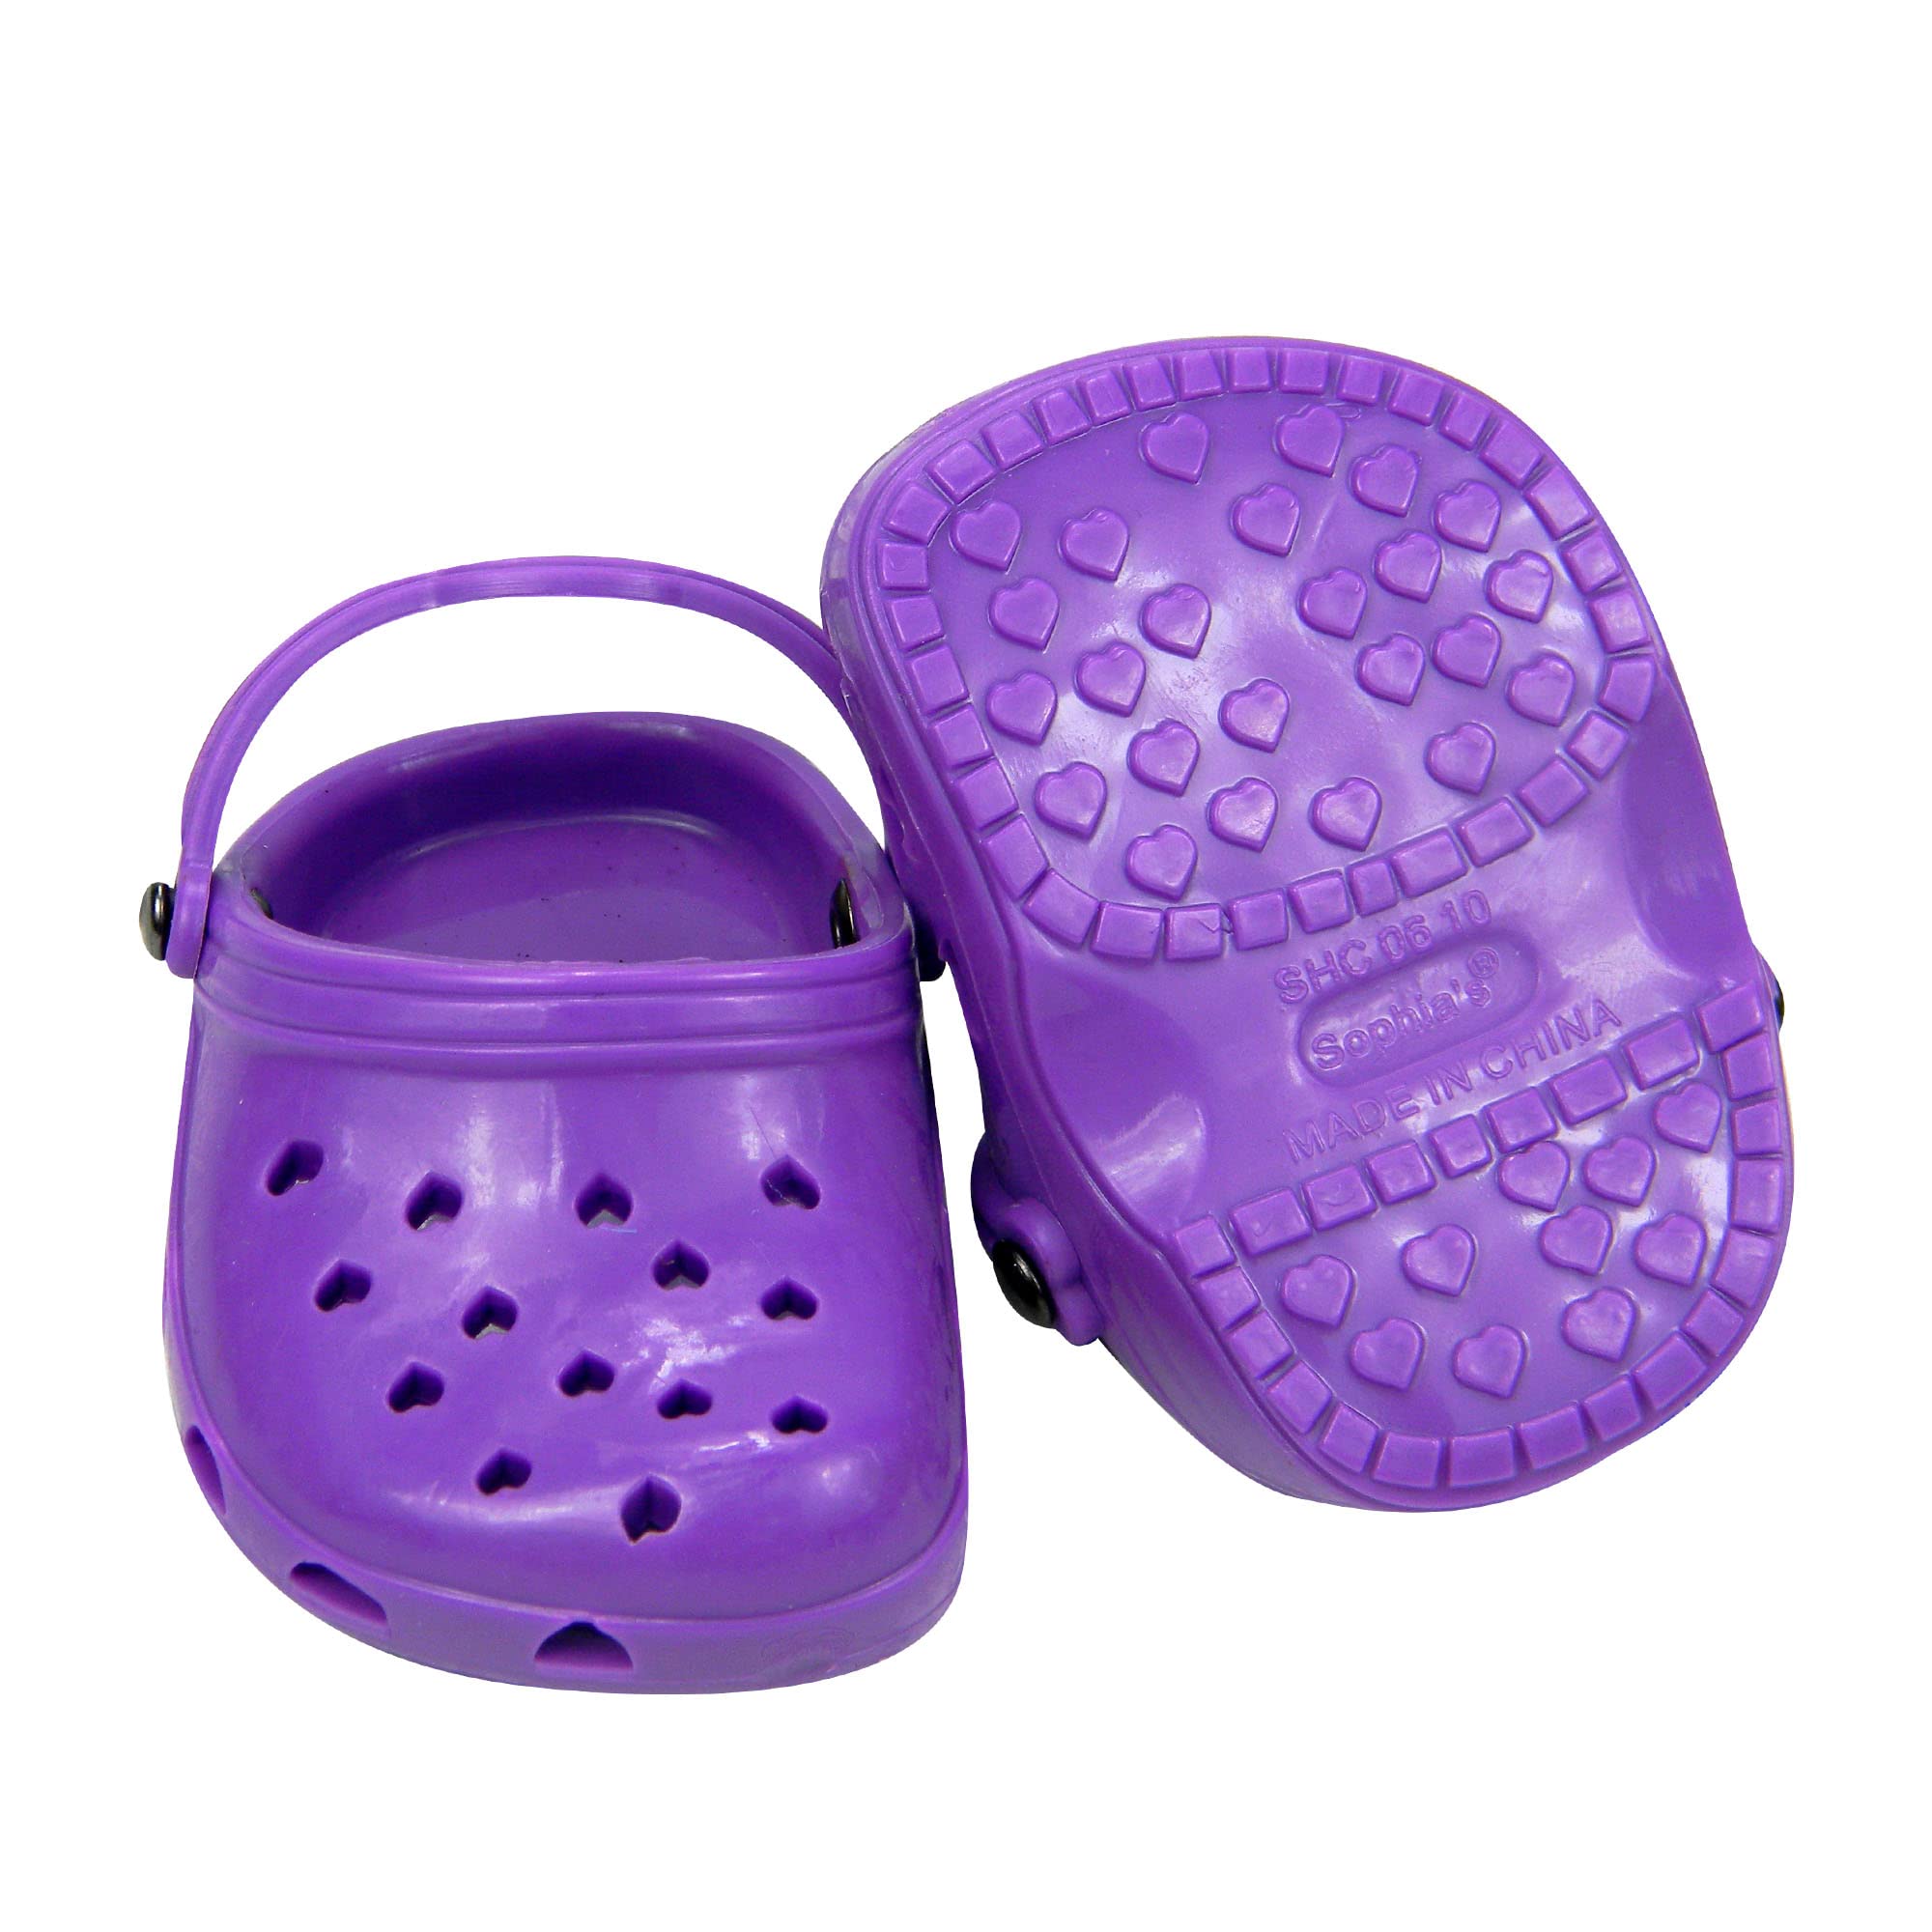 Sophia's 18" Doll Set of Two Comfy Polliwog Garden Clog Shoes in Teal and Purple